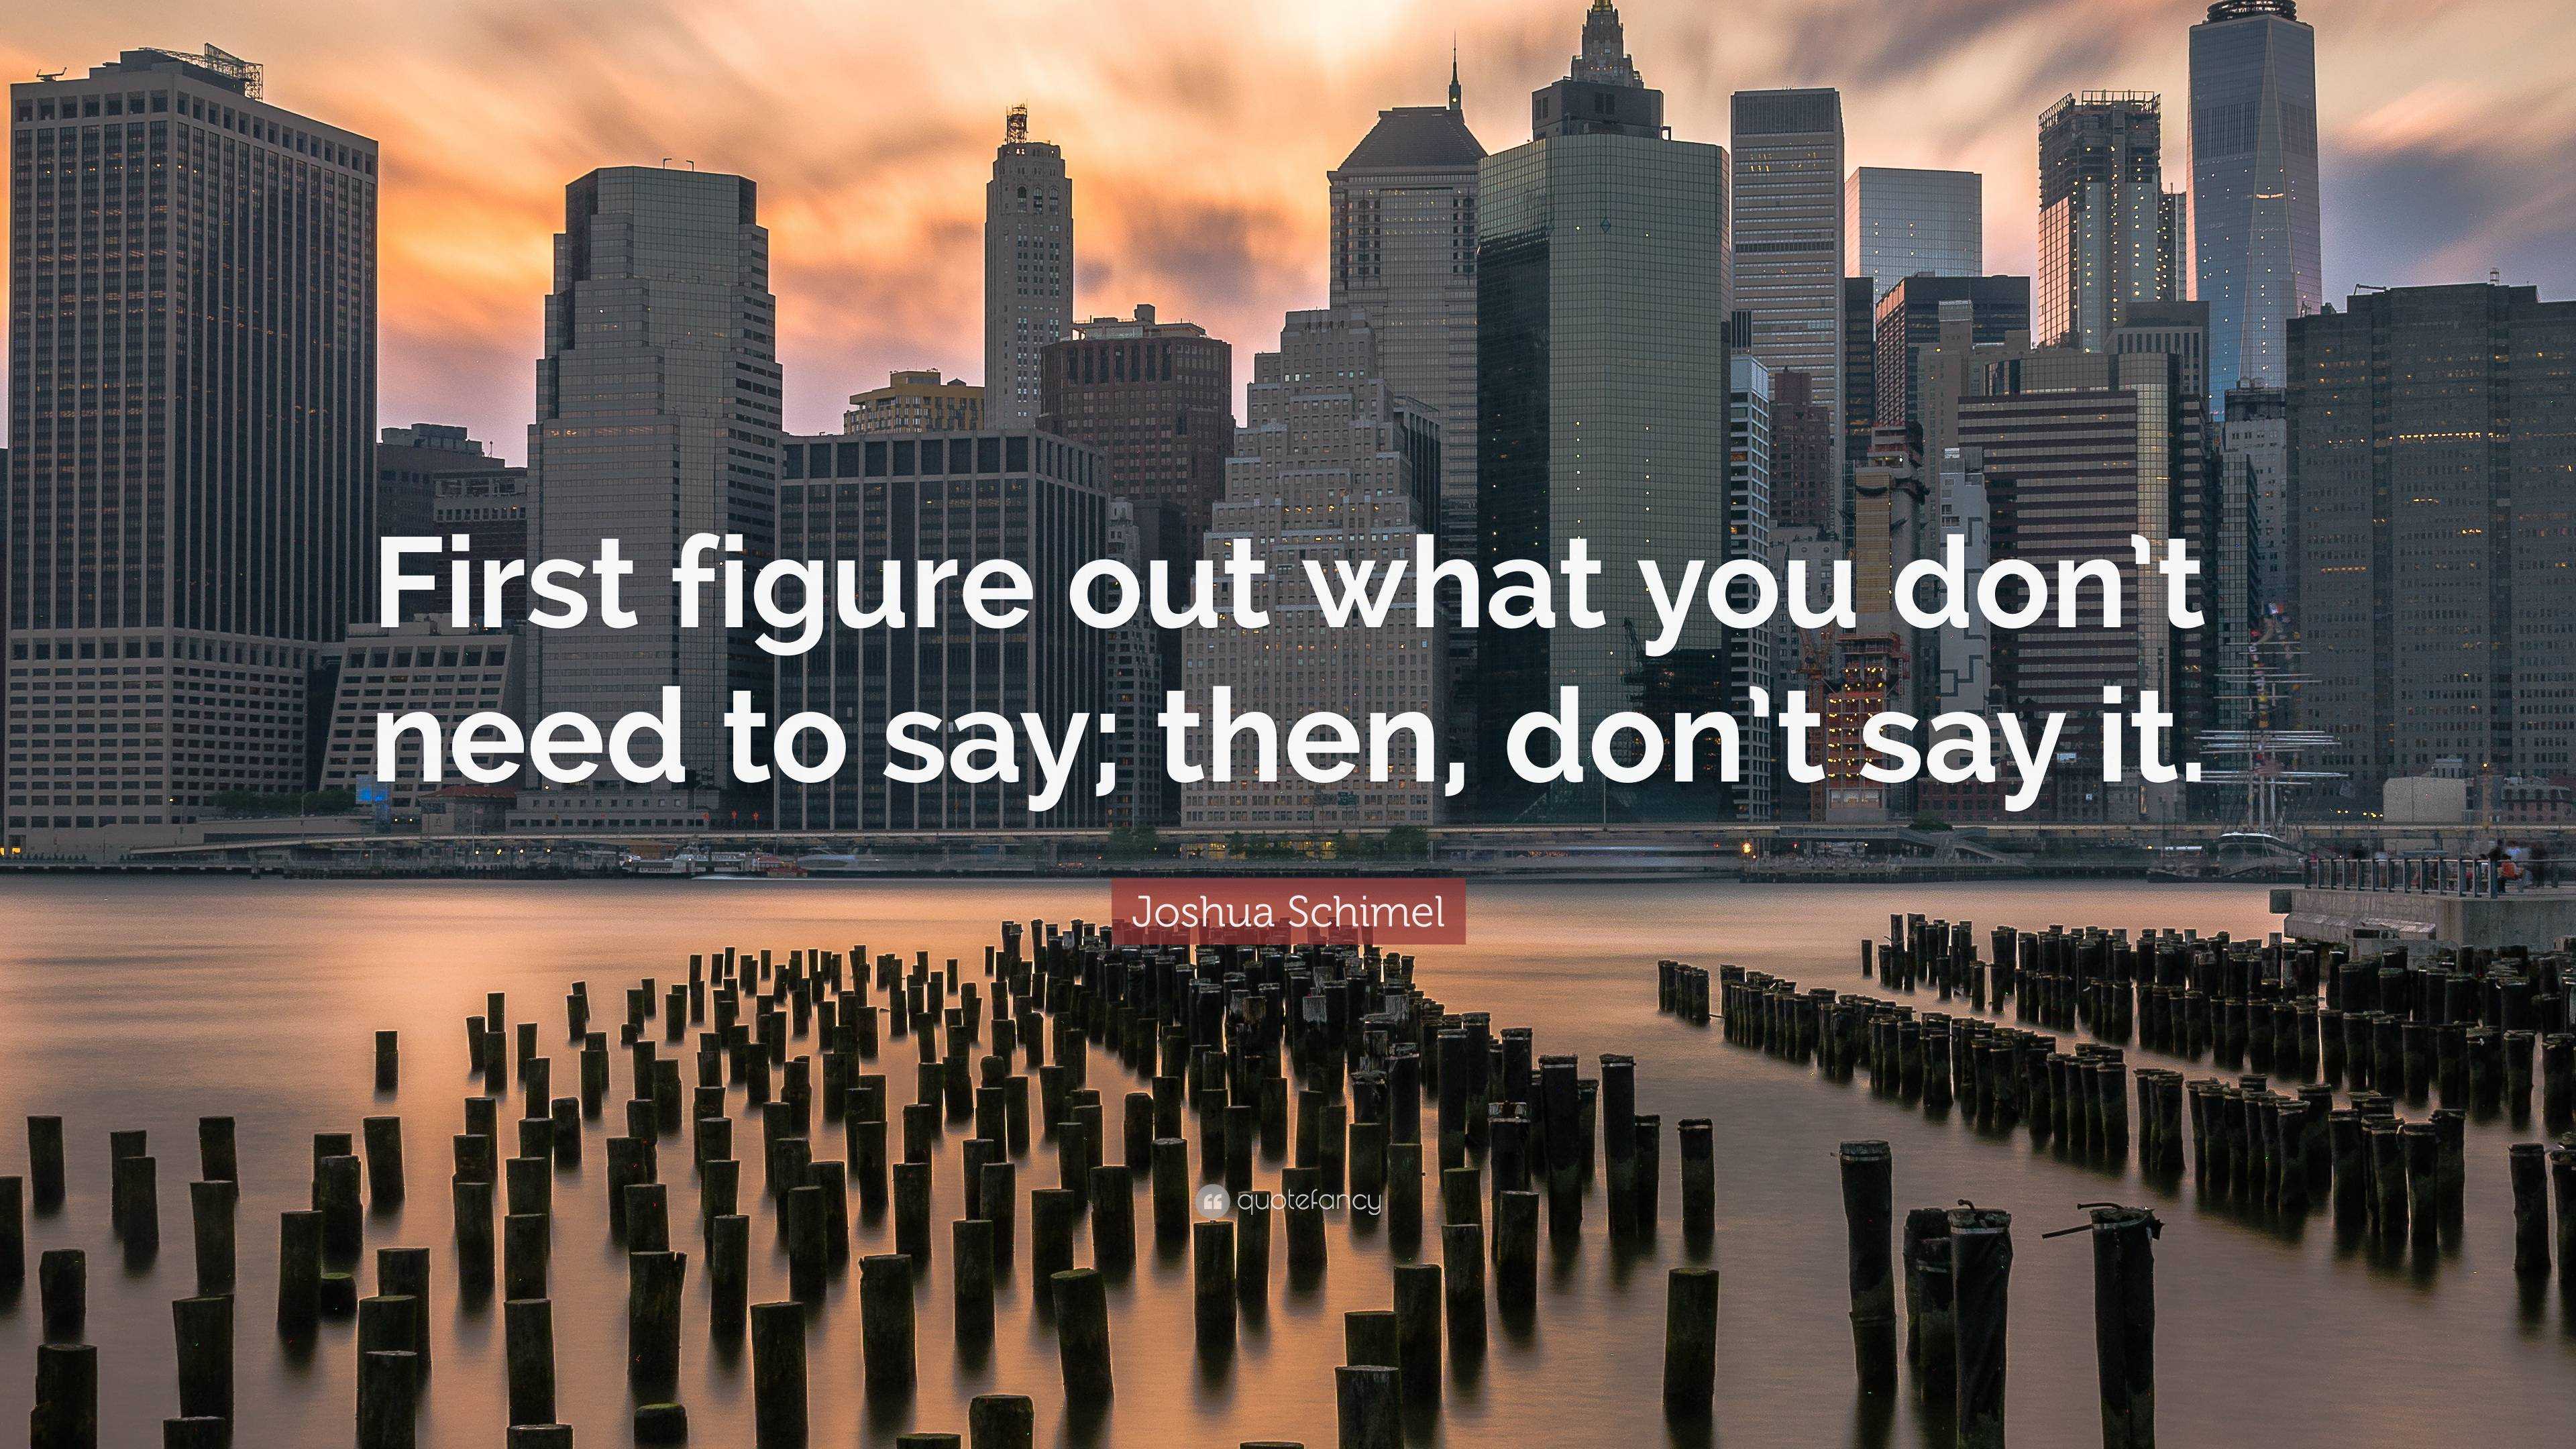 Joshua Schimel Quote: “First figure out what you don't need to say; then,  don't